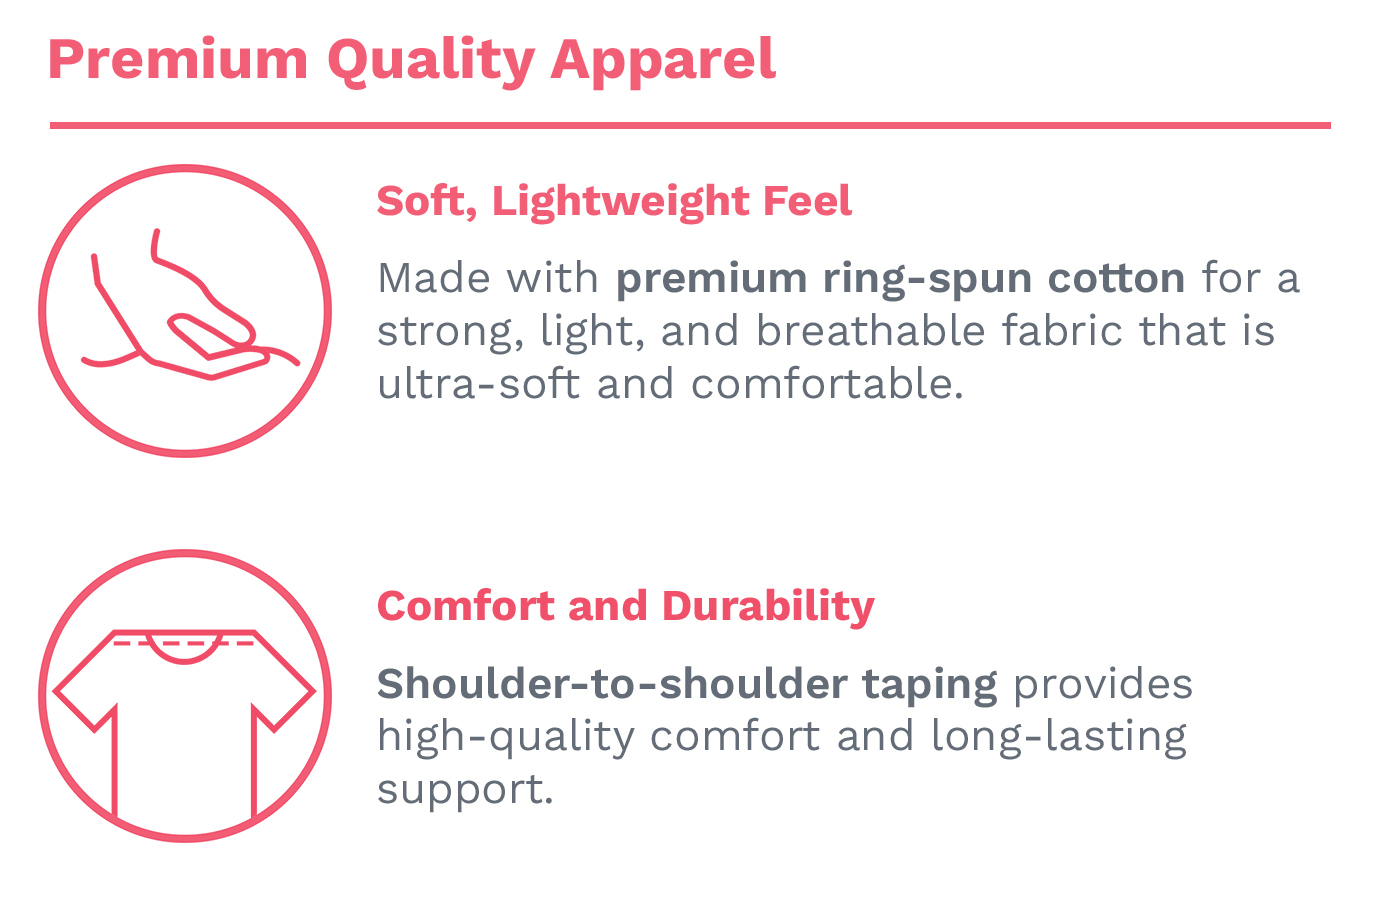 Premium Quality Apparel | Soft, Lightweight Feel | Comfort and Durability